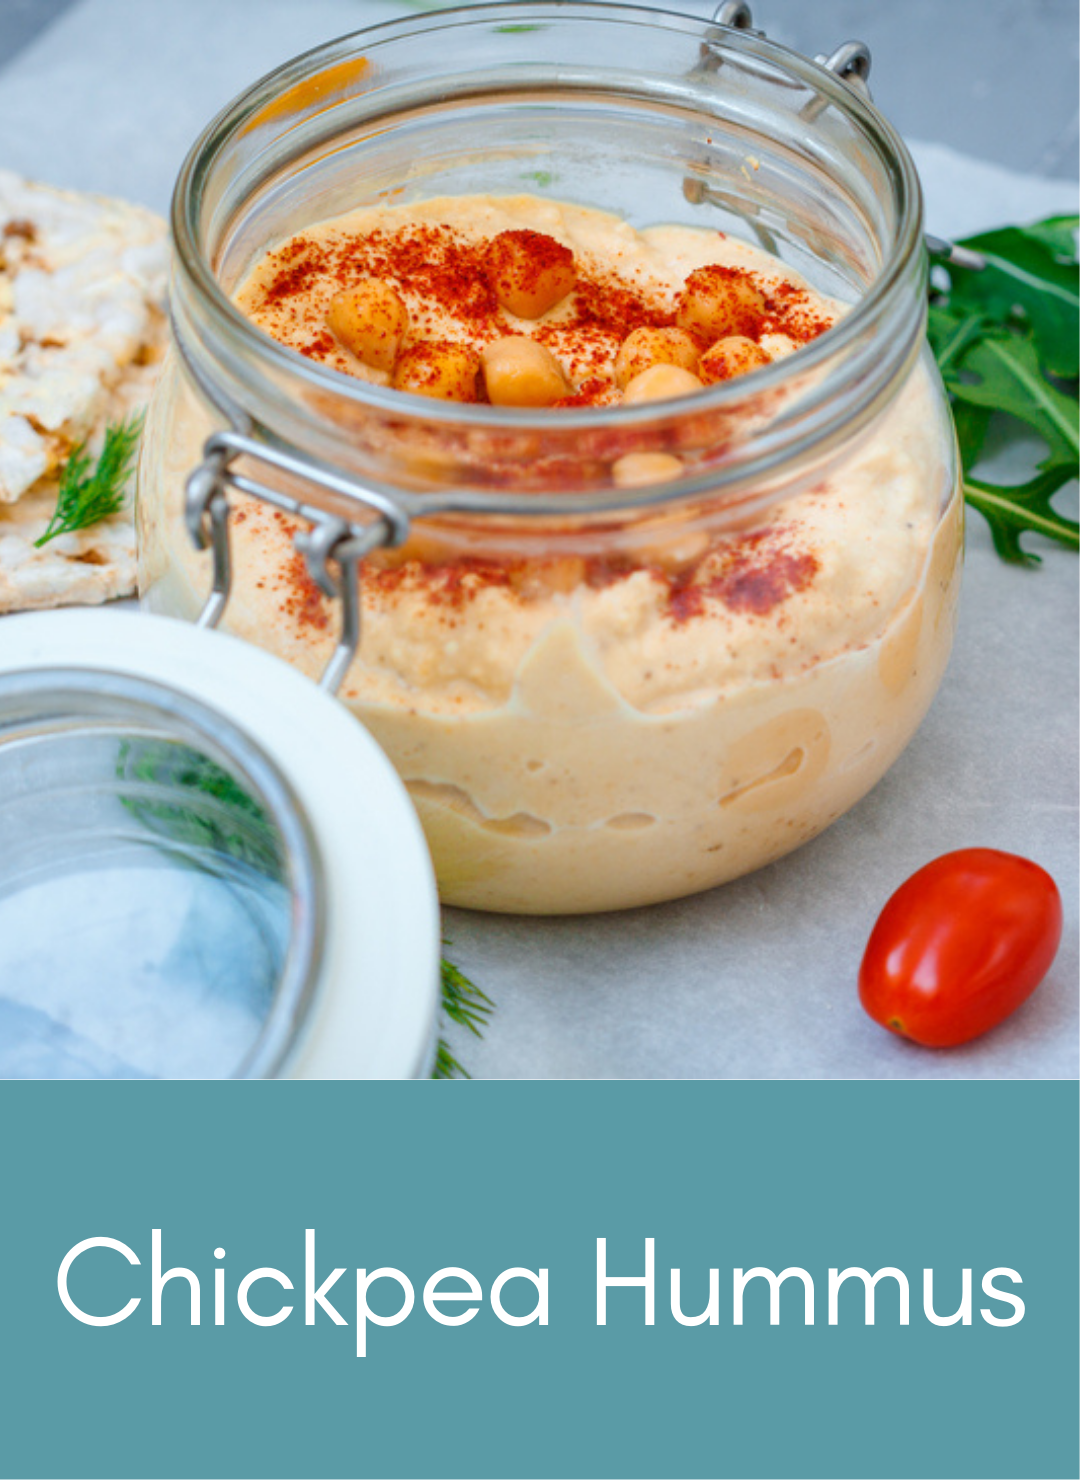 Whole food plant based vegan chickpea hummus Picture with link to recipe